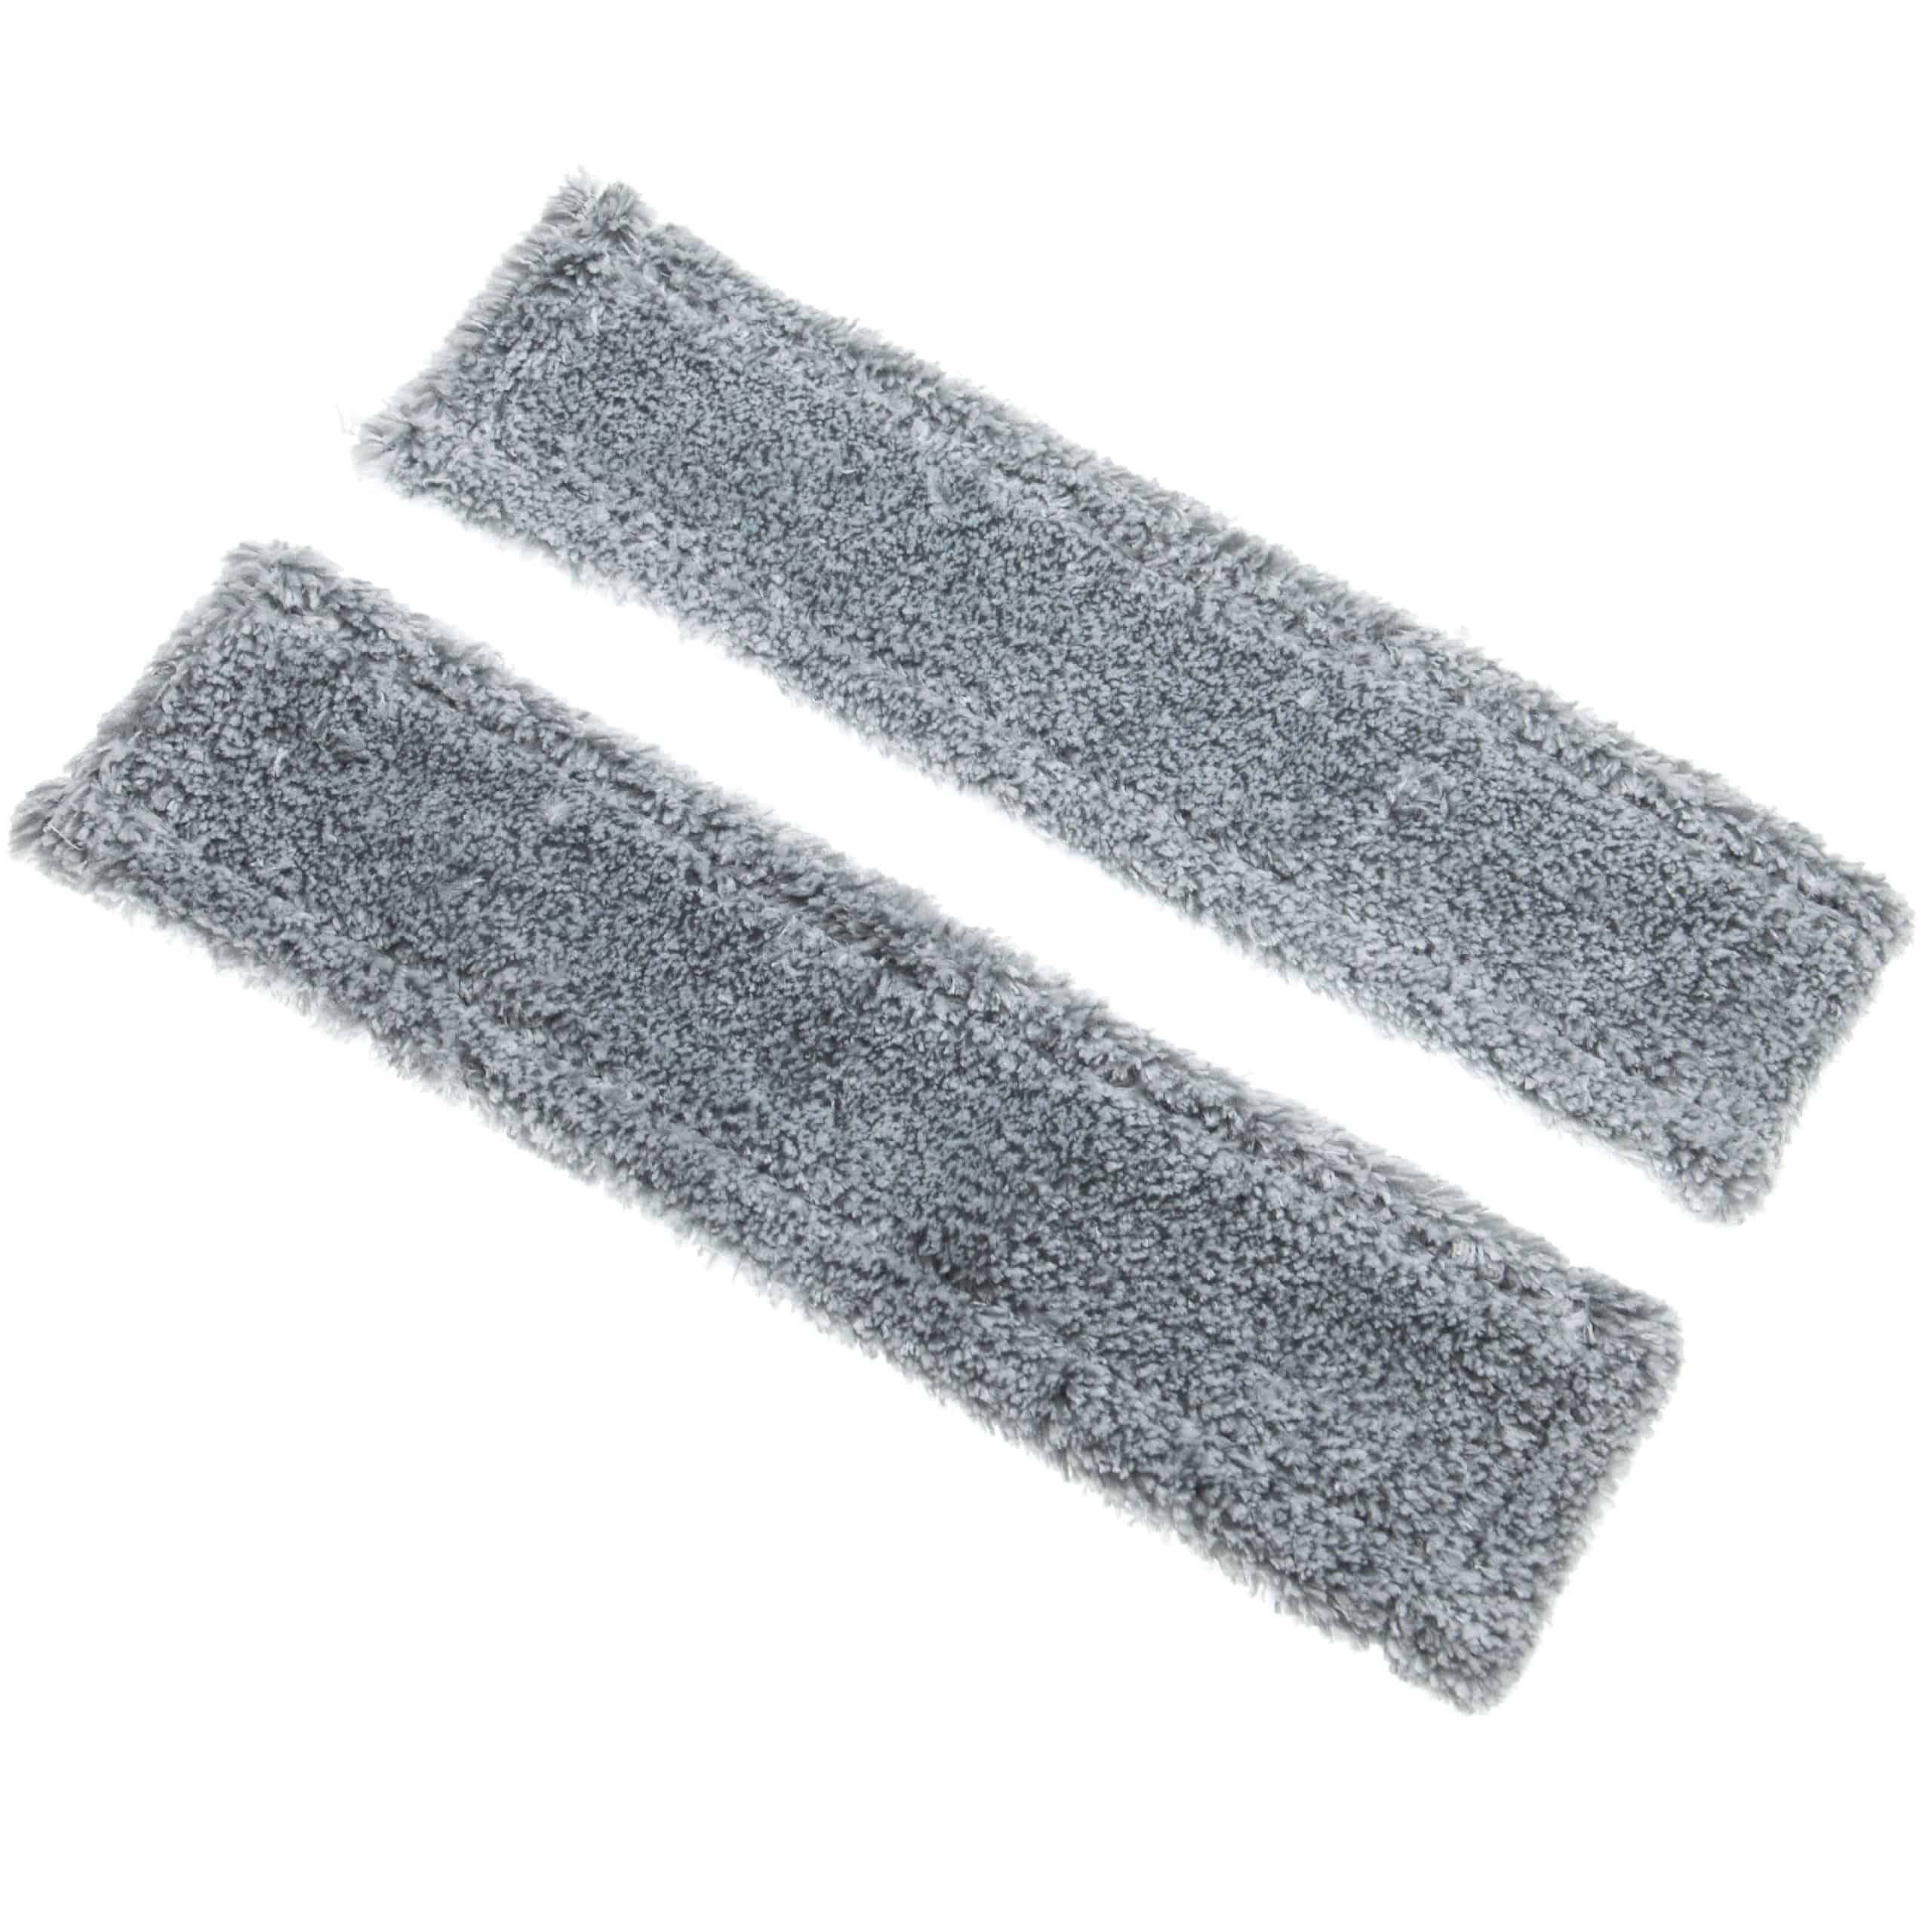 2x Cover Scrubber Sleeve Outdoor replaces Kärcher 2.633-131.0 for Kärcher Window Cleaner Squeegee